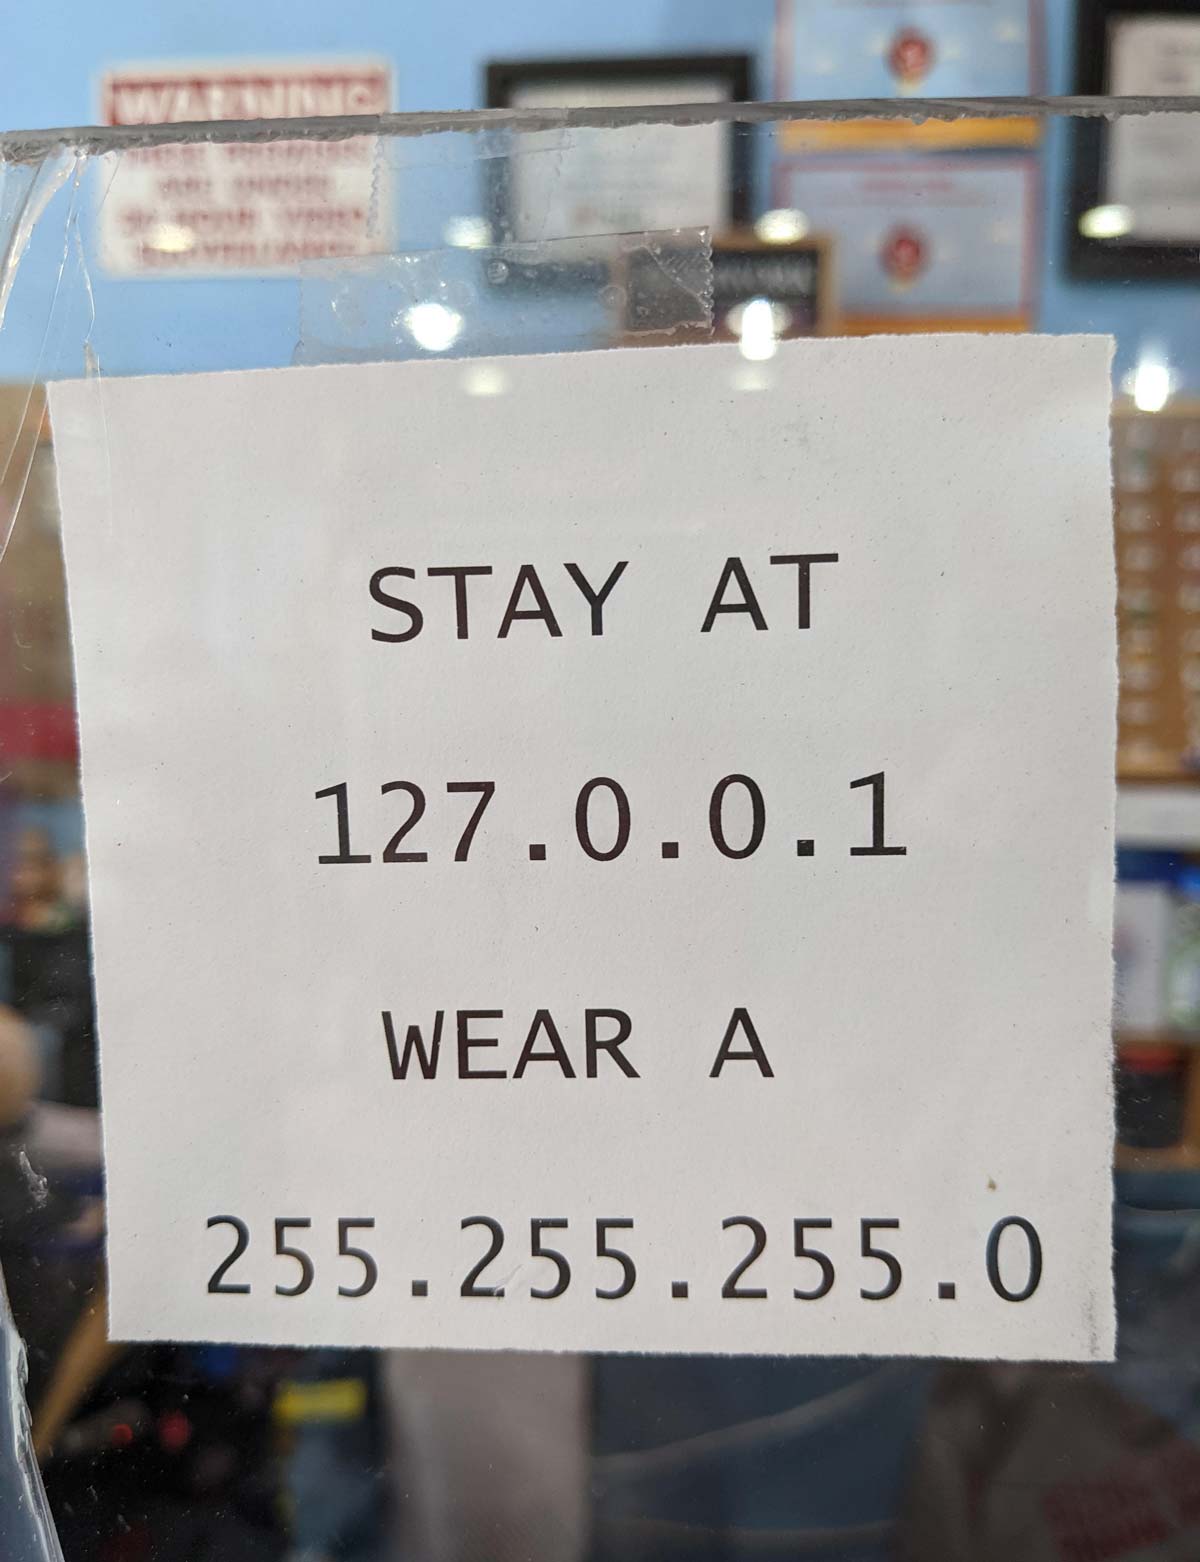 This sign at my local grocery store